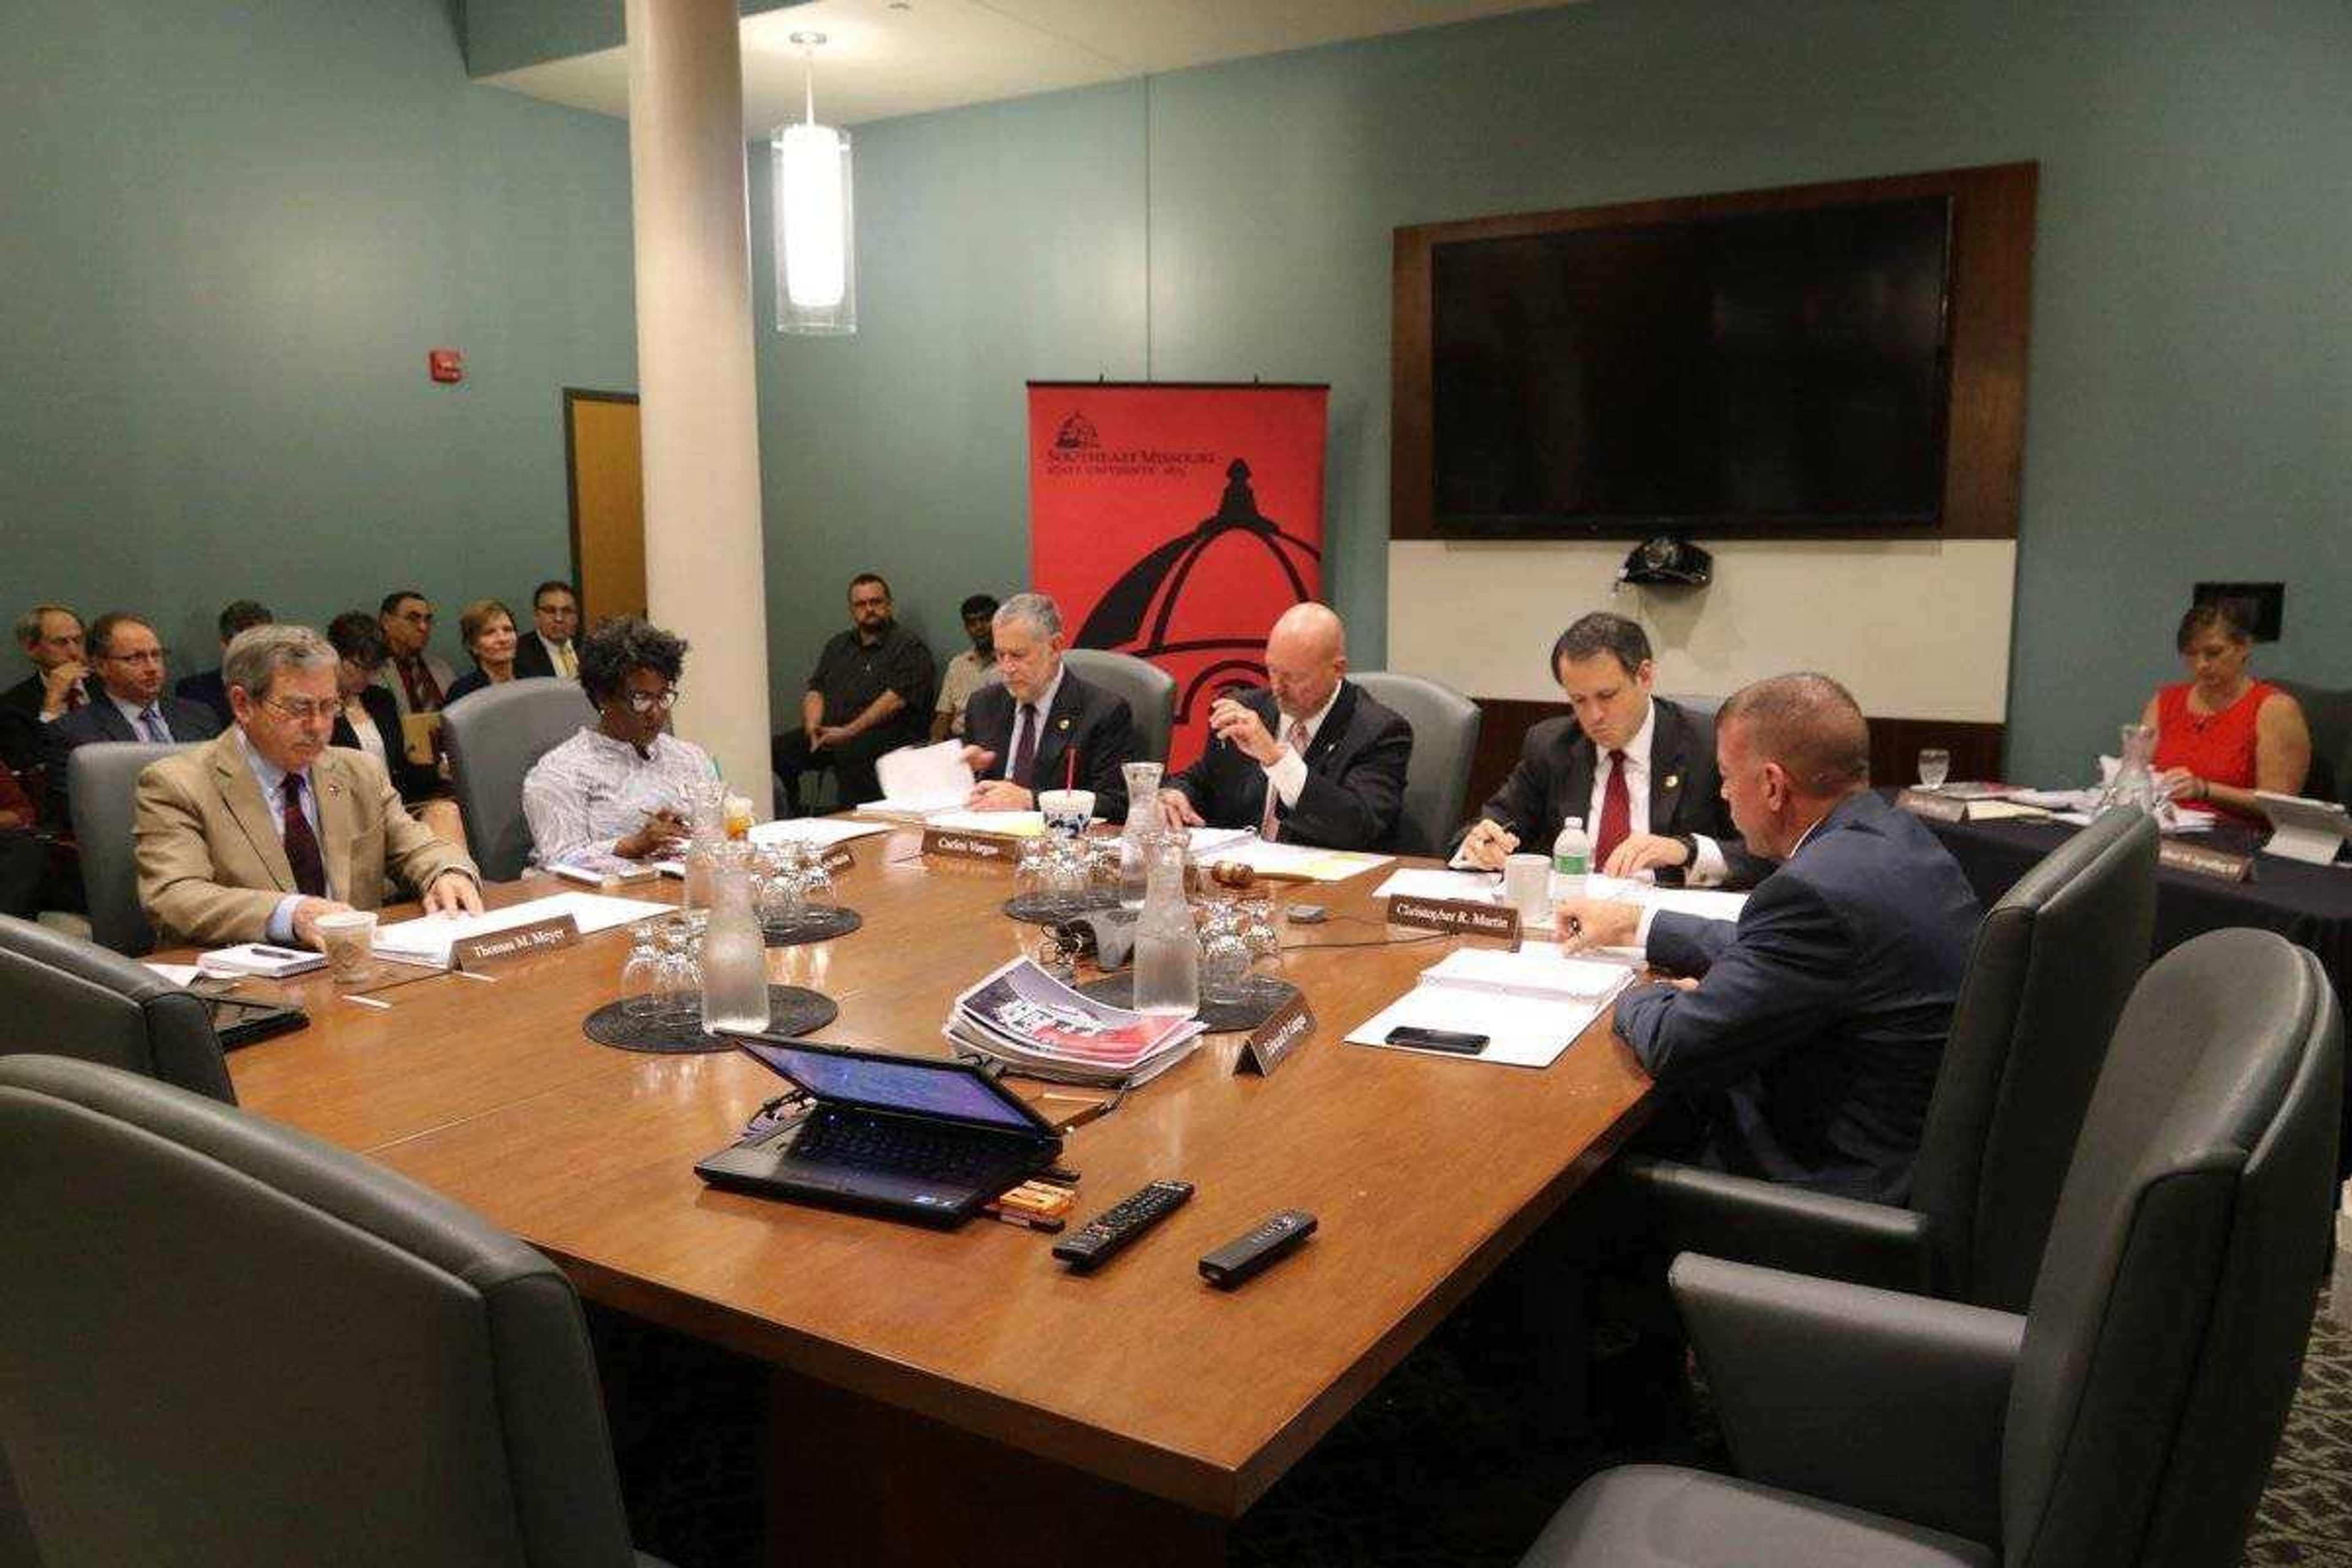 The Southeast Board of Regents met on Friday, Sept. 22 to discuss several campus updates.